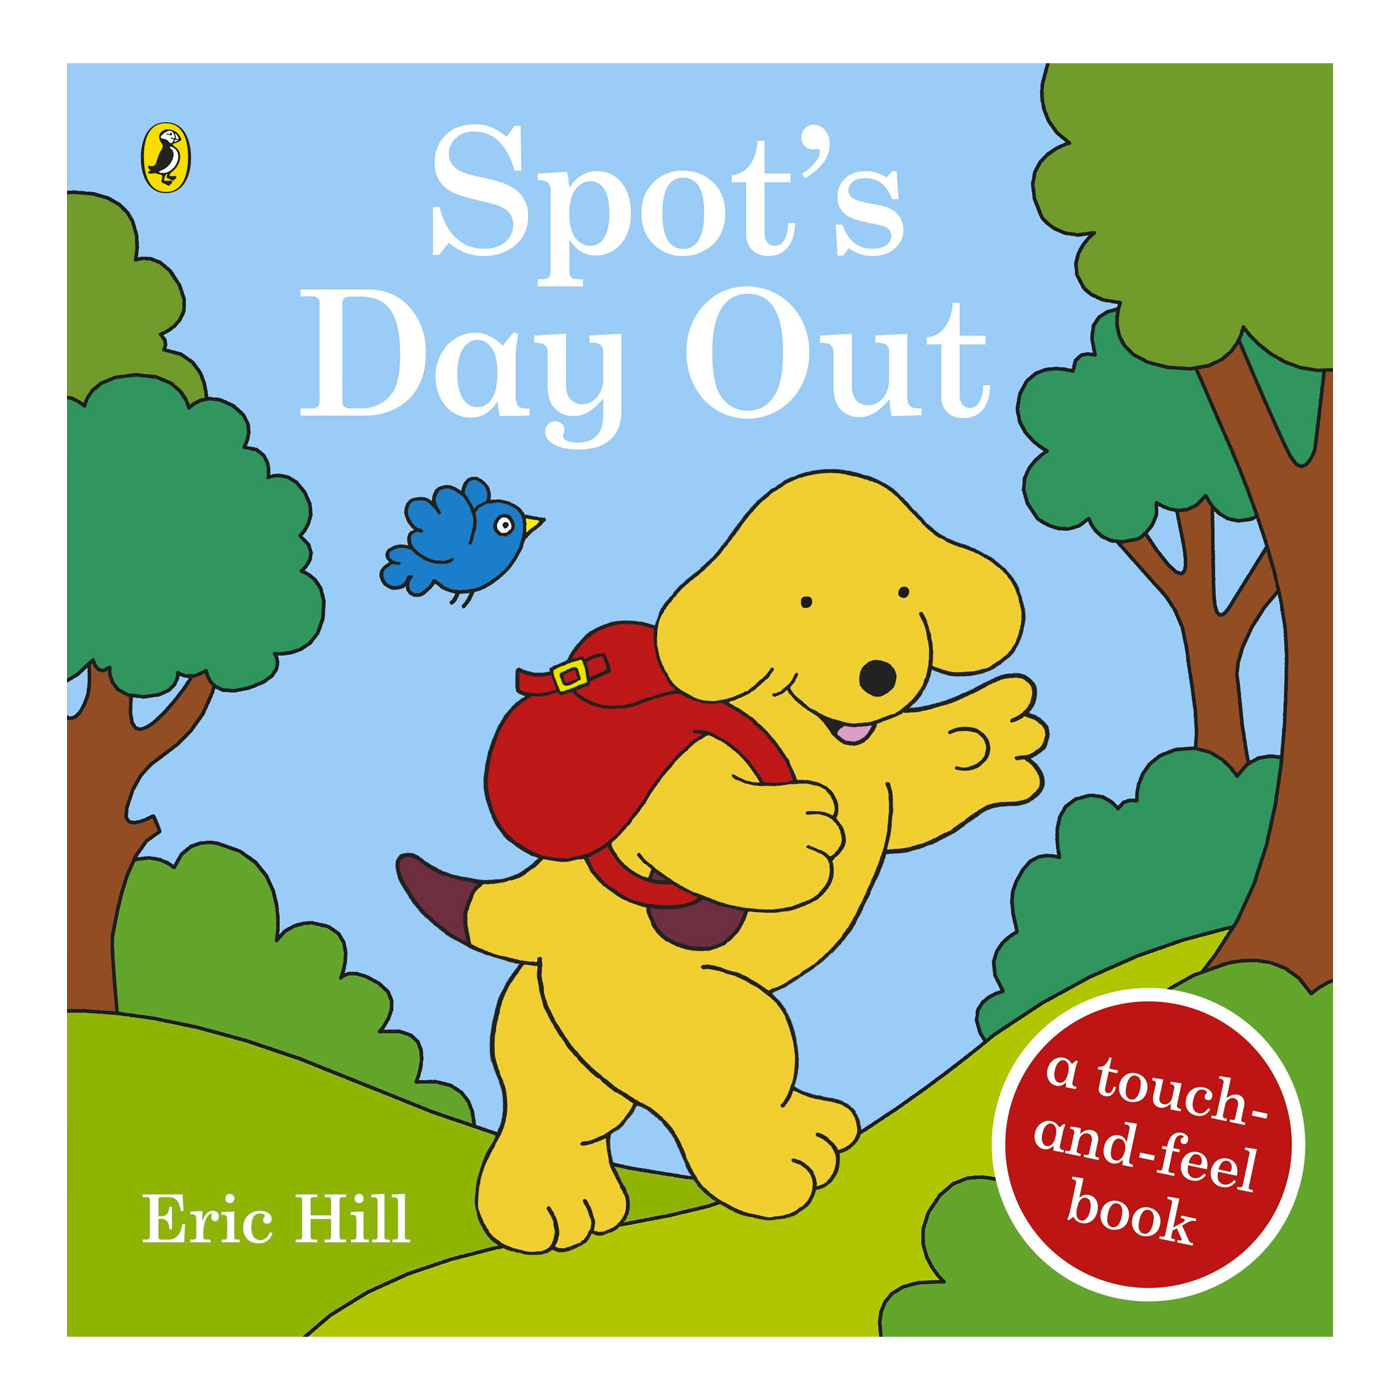  Spot's Day Out